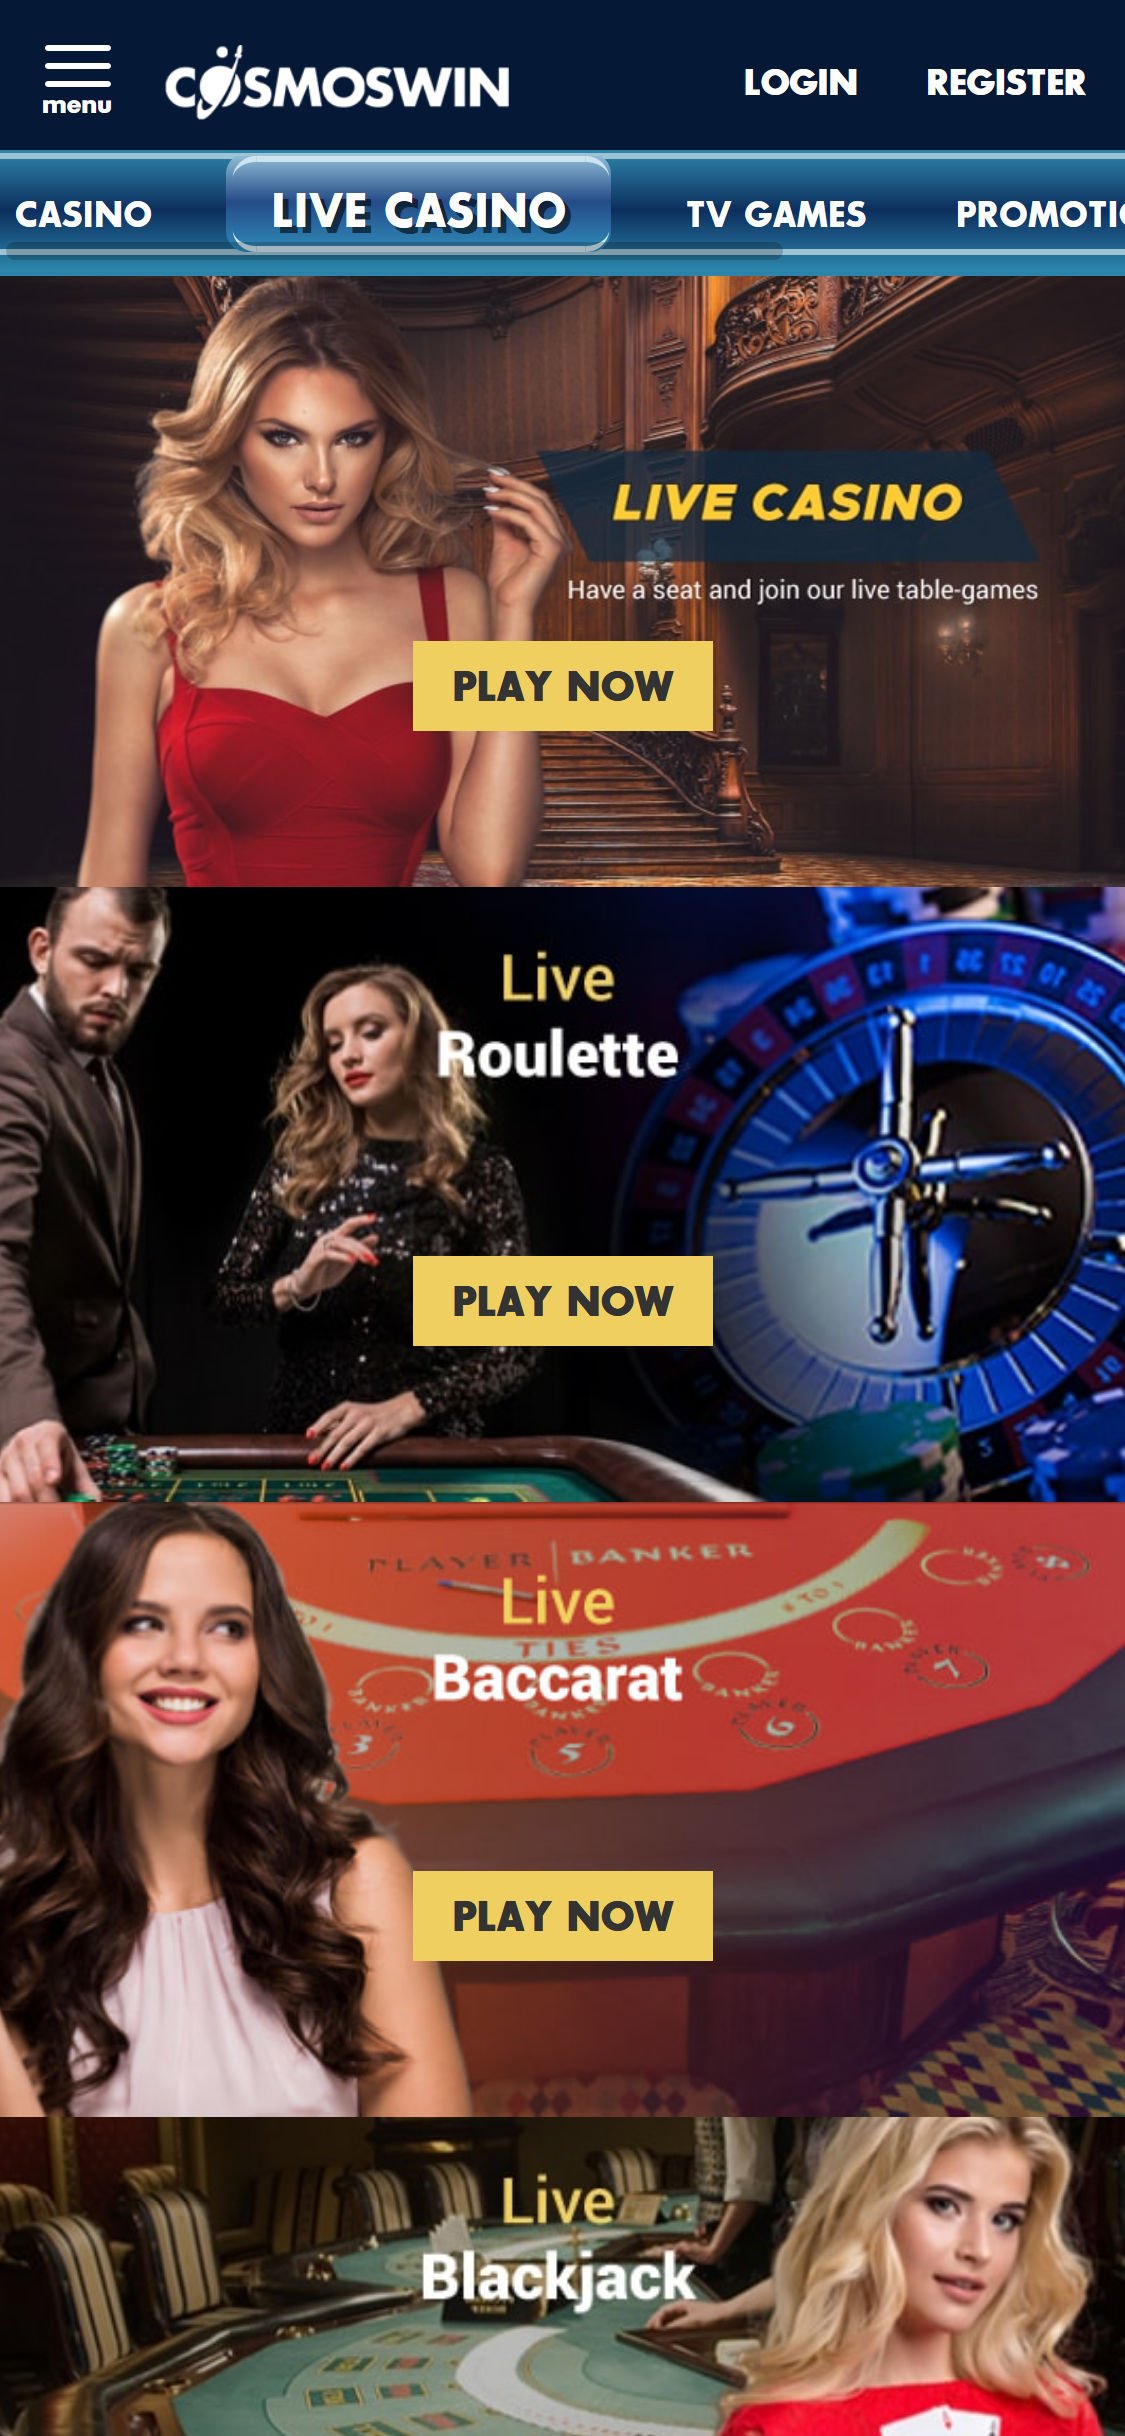 Cosmoswin Casino Mobile Live Dealer Games Review